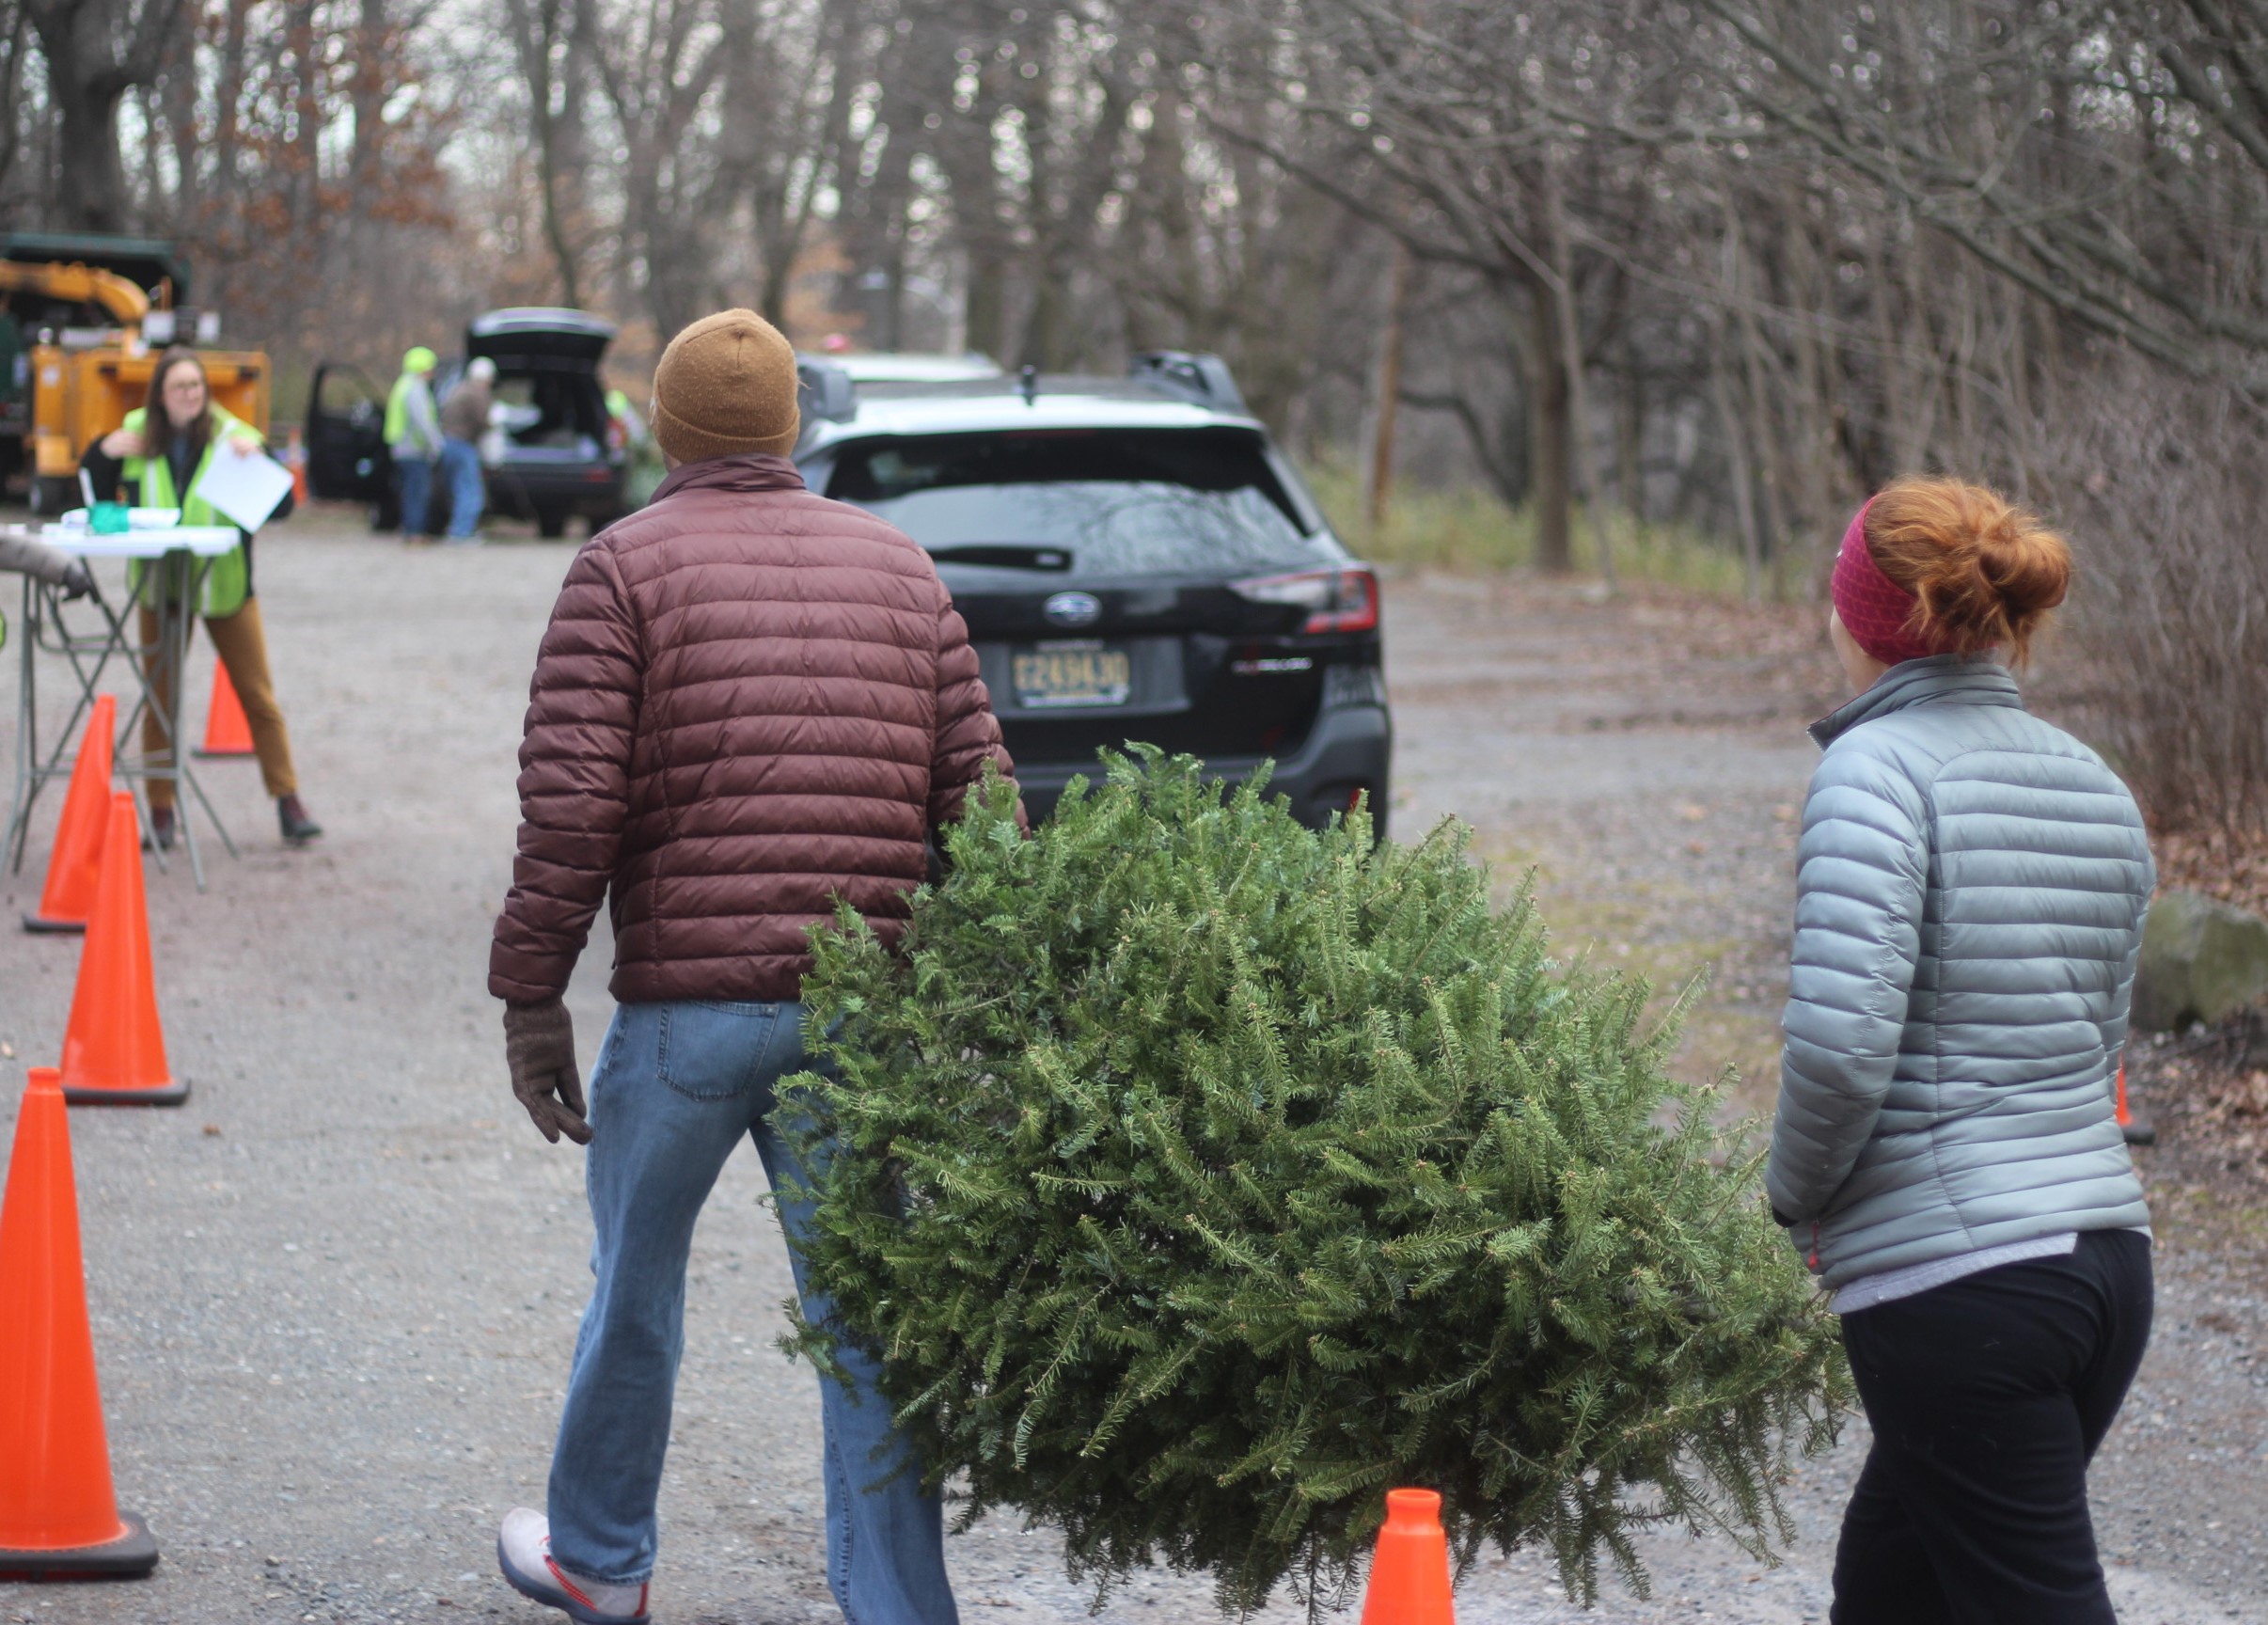 Two people carry a Christmas tree to a wood chipper.